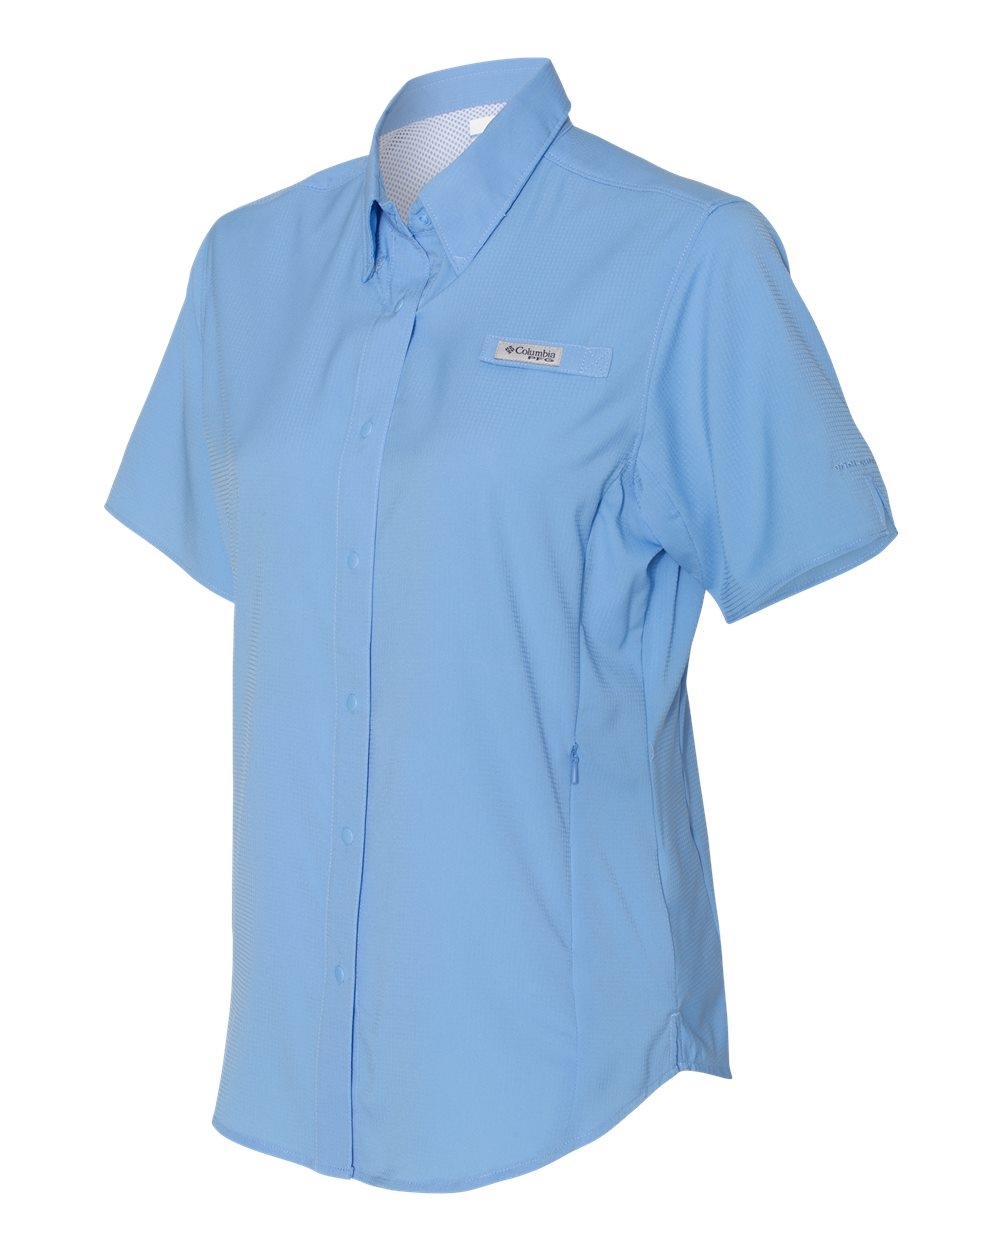 Columbia Women's PFG Tamiami™ II Short-Sleeve Fishing Shirts 127571. Free  shipping available. 30 Day Return Policy. Quantity Discounts.